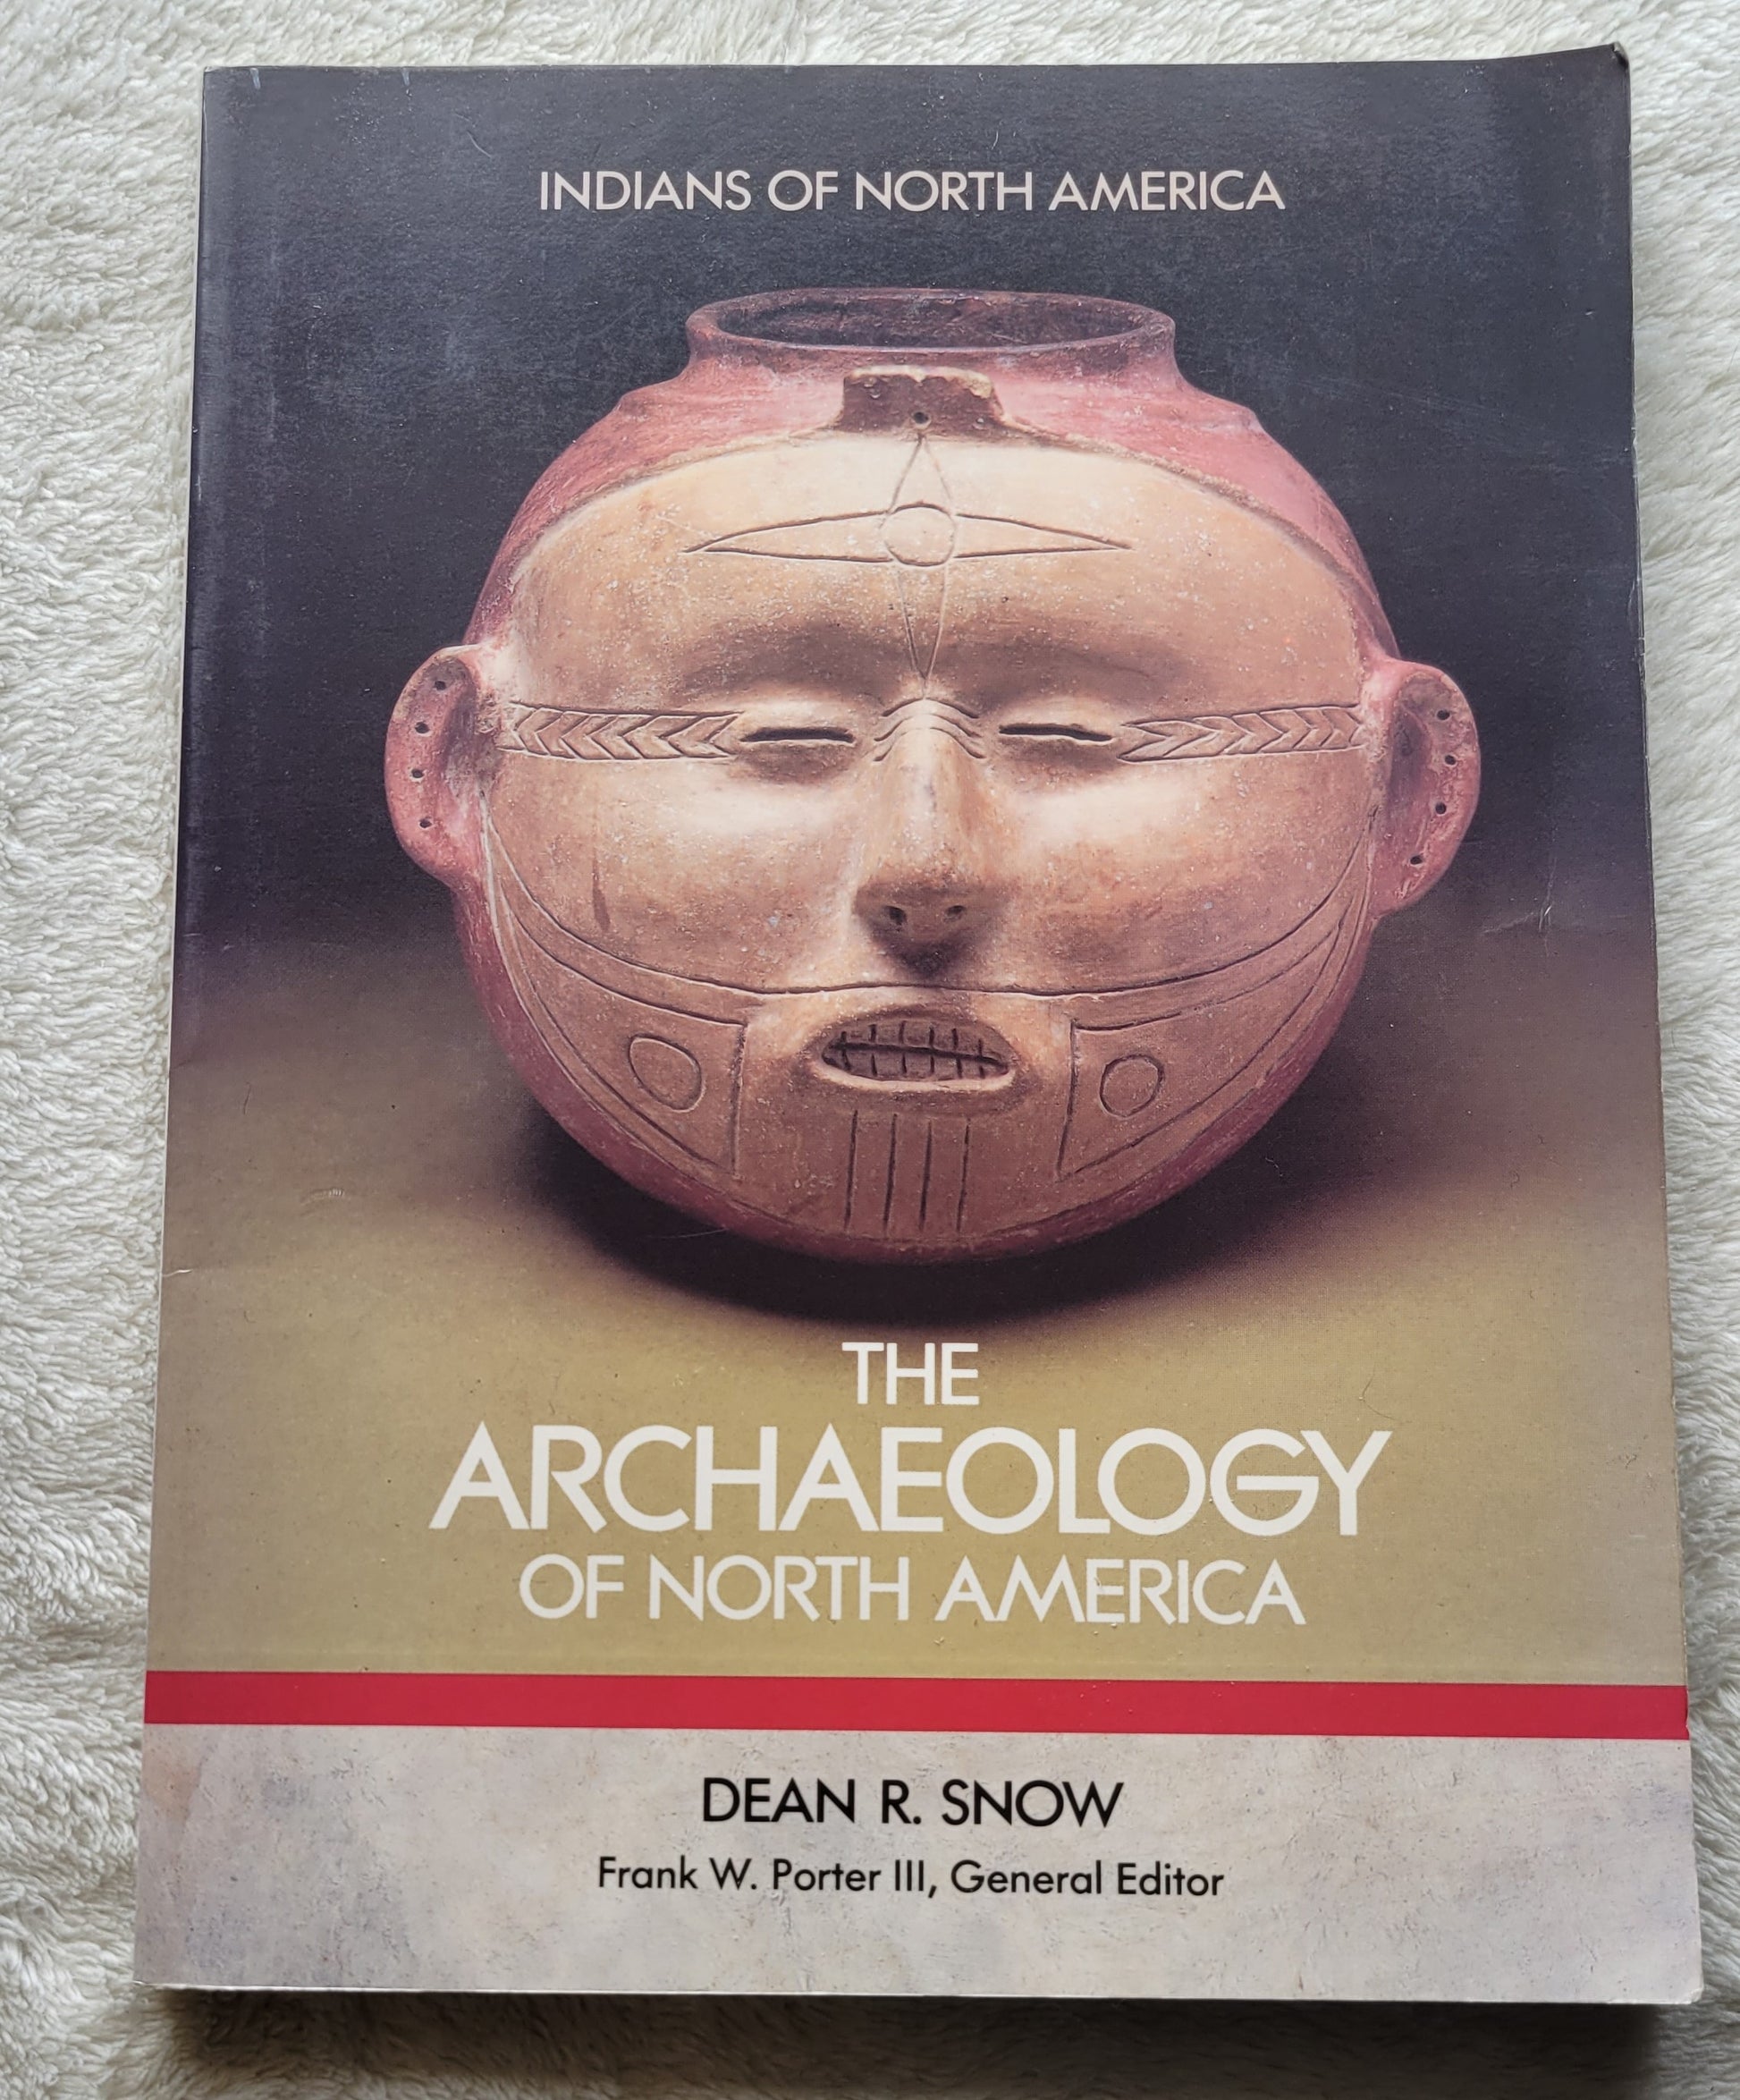 "Archaeology of North America" by Dean R. Snow, Chelsea House publishers, 1989. "Archaeology of North America tells the fascinating story of how archaeologists investigate the origins and prehistory of American Indians.  View of front.